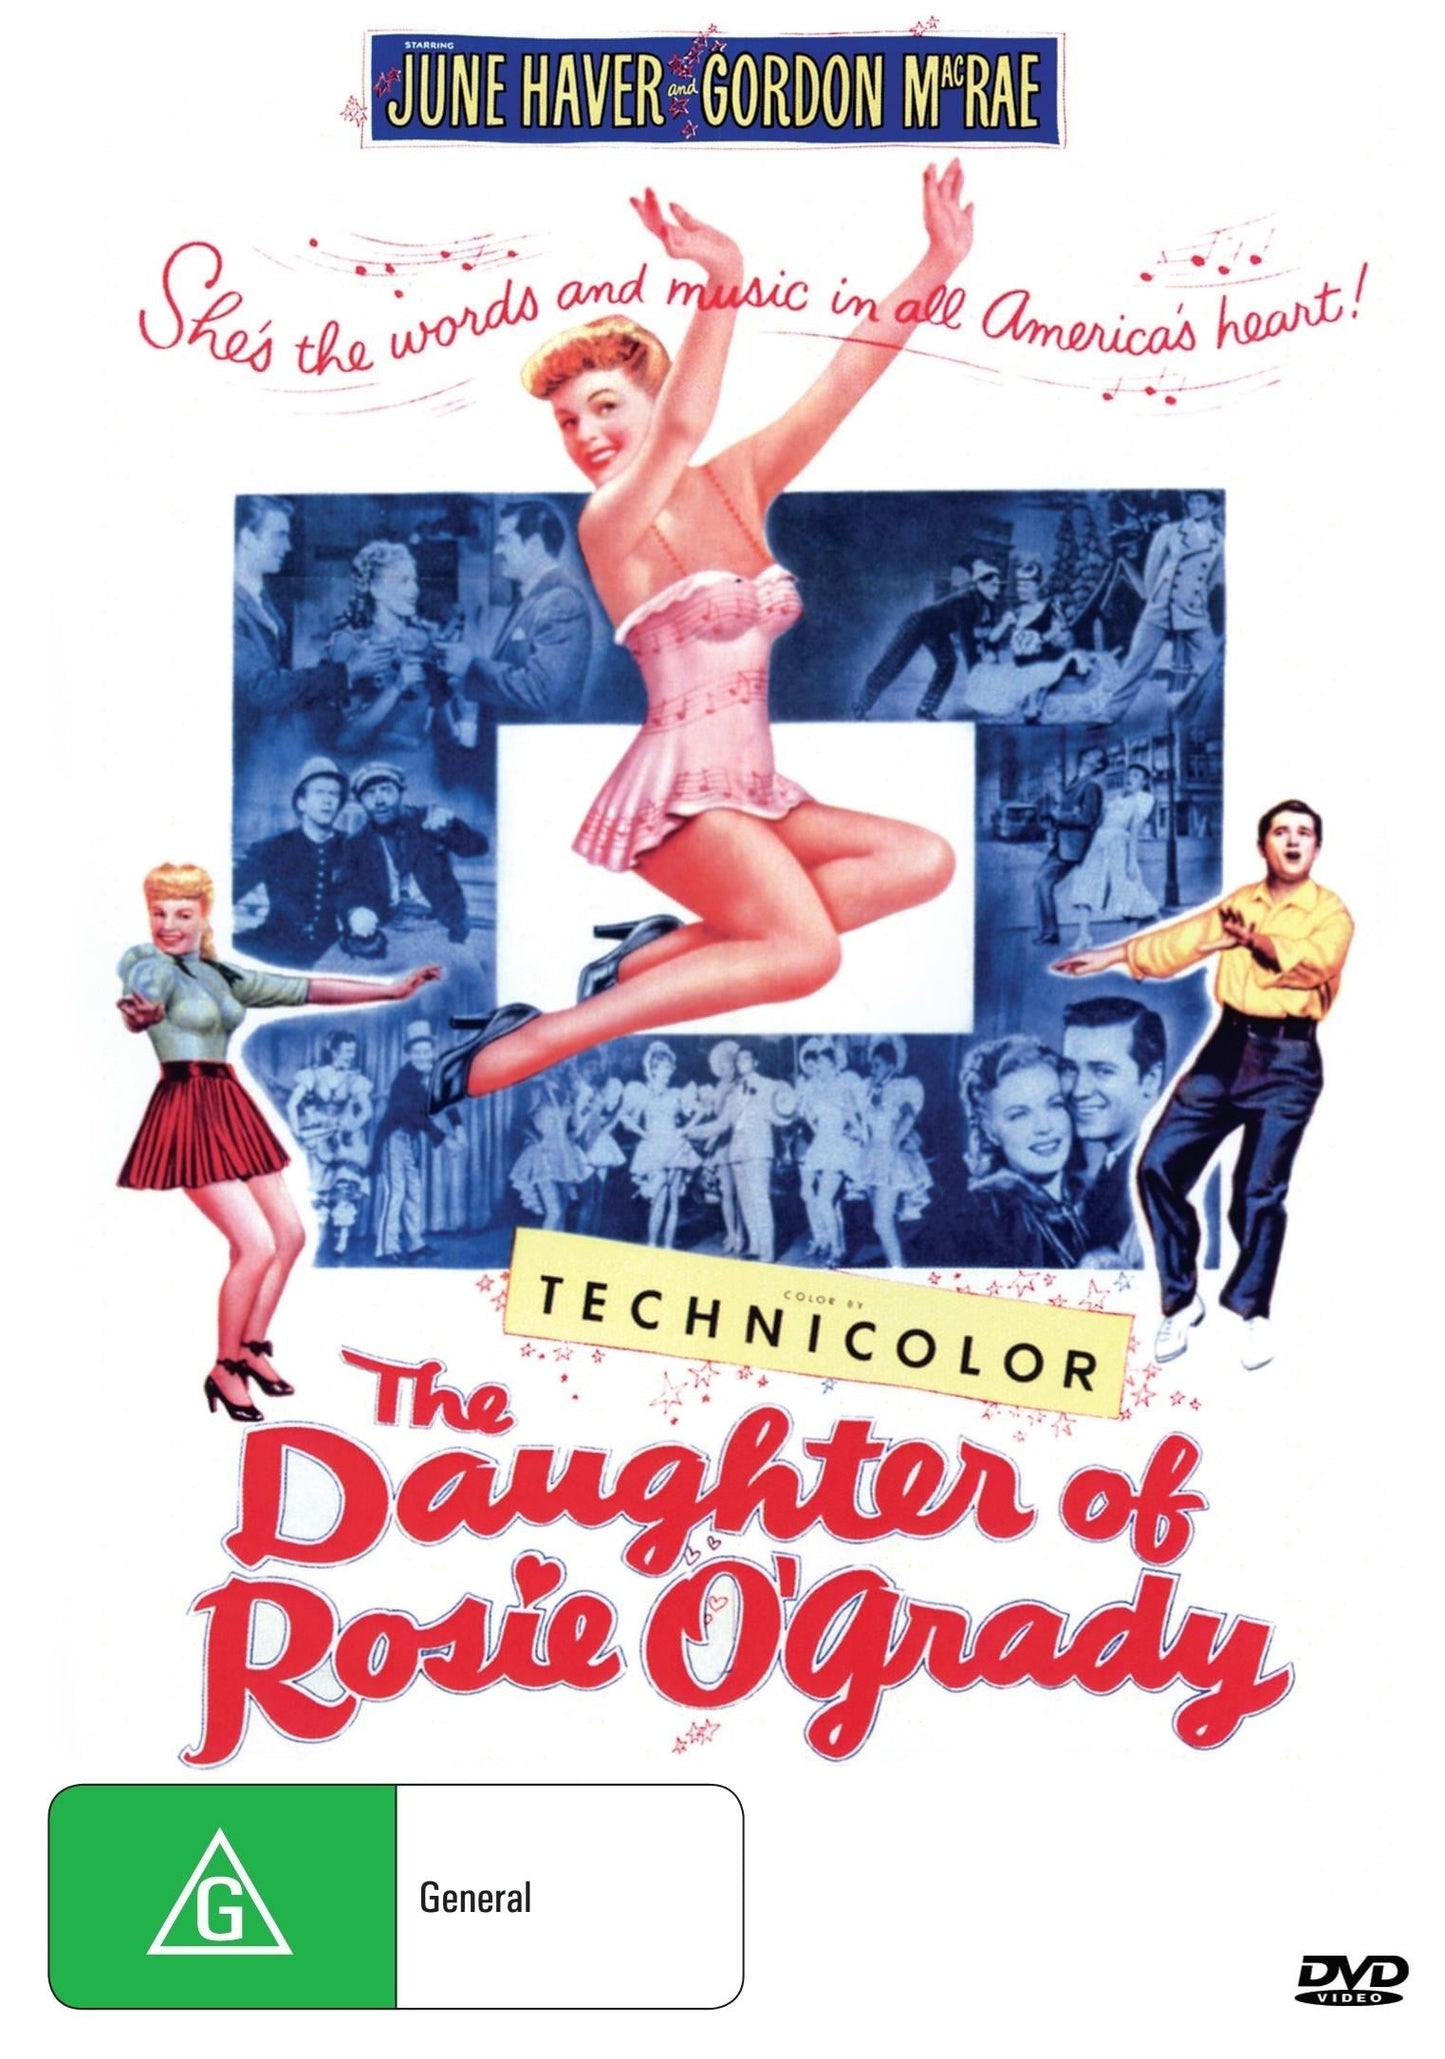 The Daughter of Rosie O'Grady rareandcollectibledvds